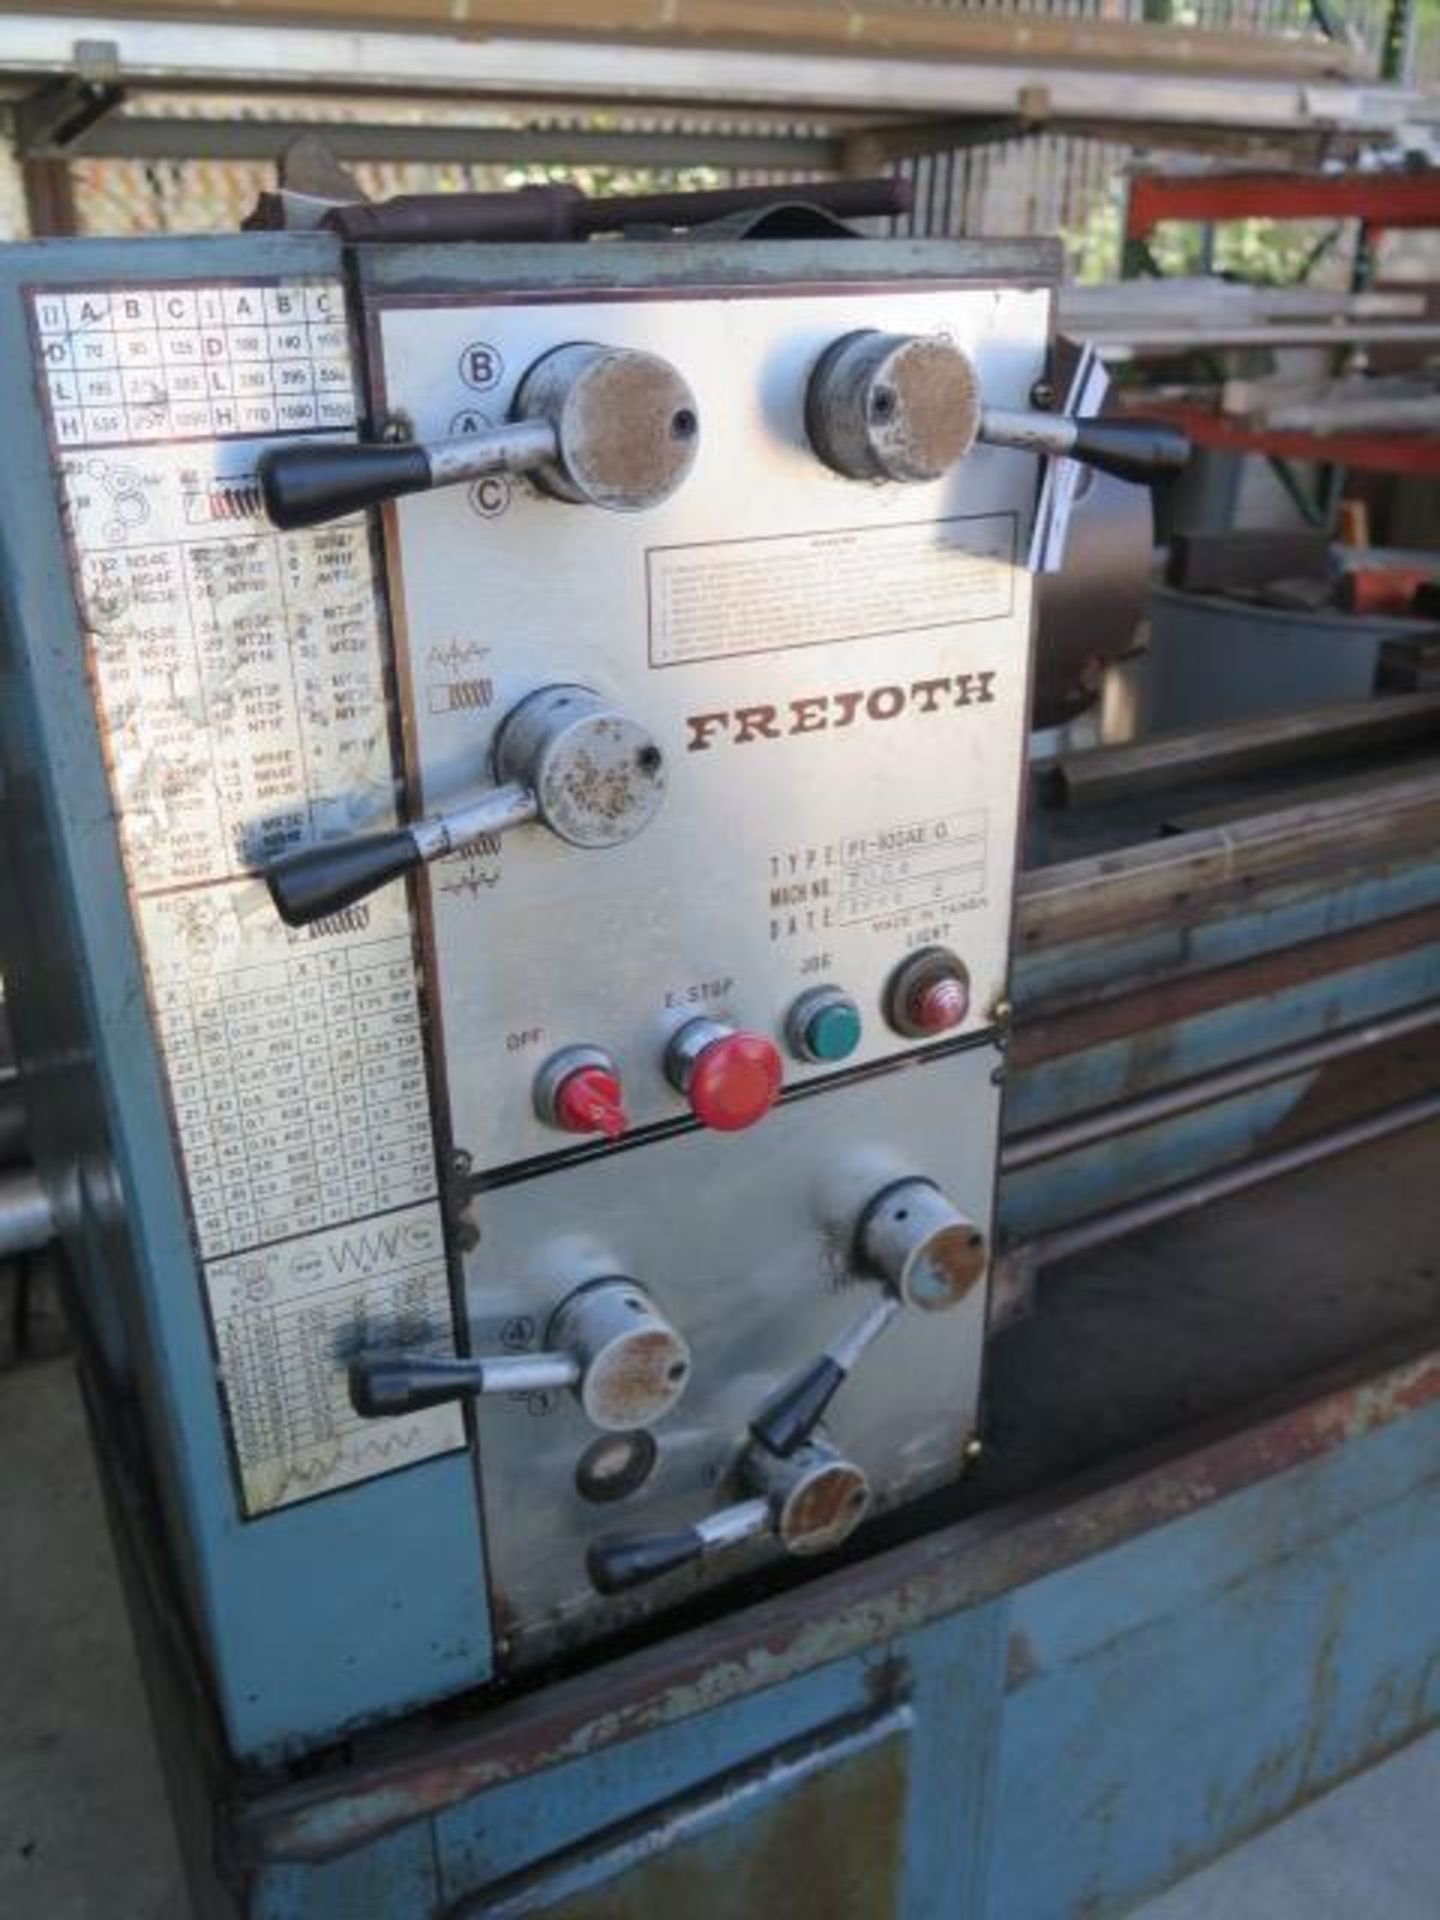 Frejoth FI-900 AE/G Lathe s/n 7334 w/ Inch/mm Threading, Tailstock (SOLD AS-IS – NO WARRANTY) - Image 4 of 12